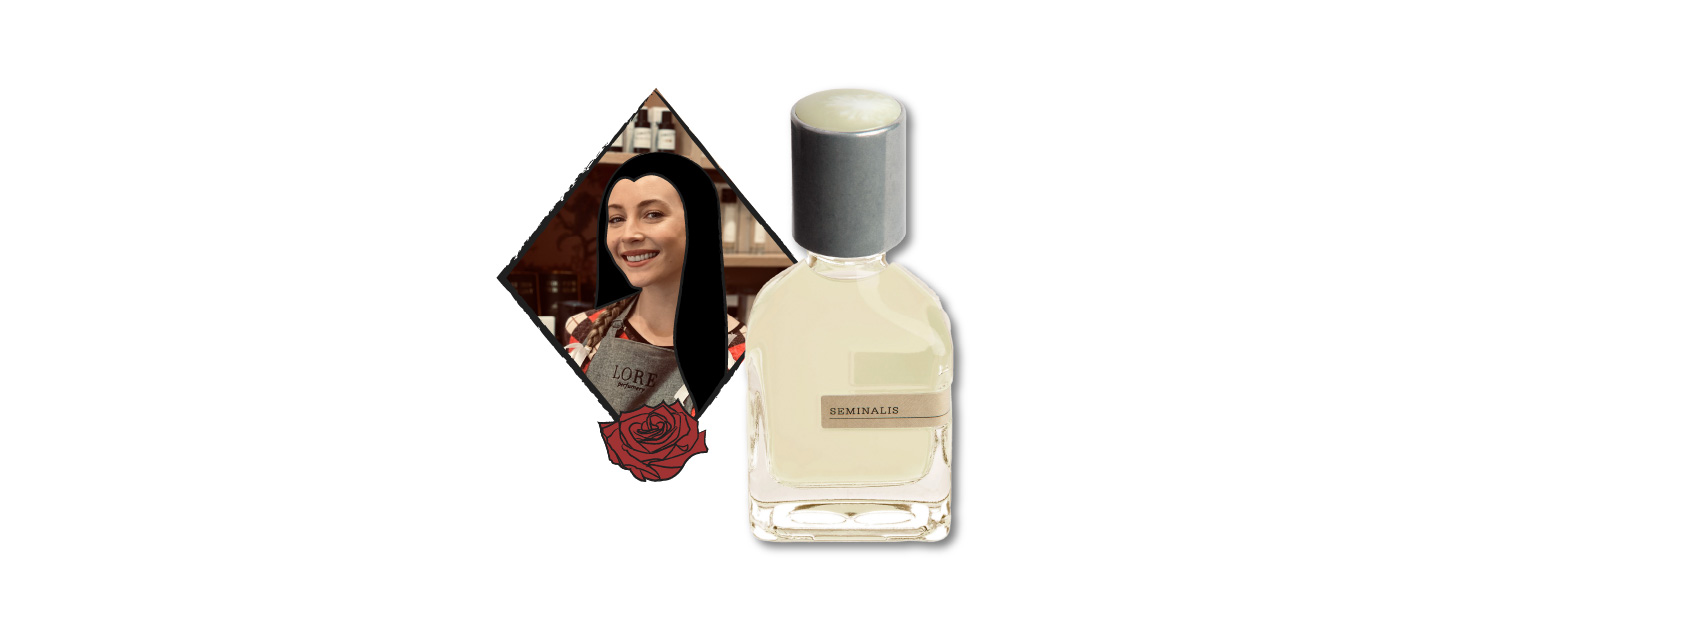 bottle of seminalis by orto parisi and mav from the lore team as morticia addams